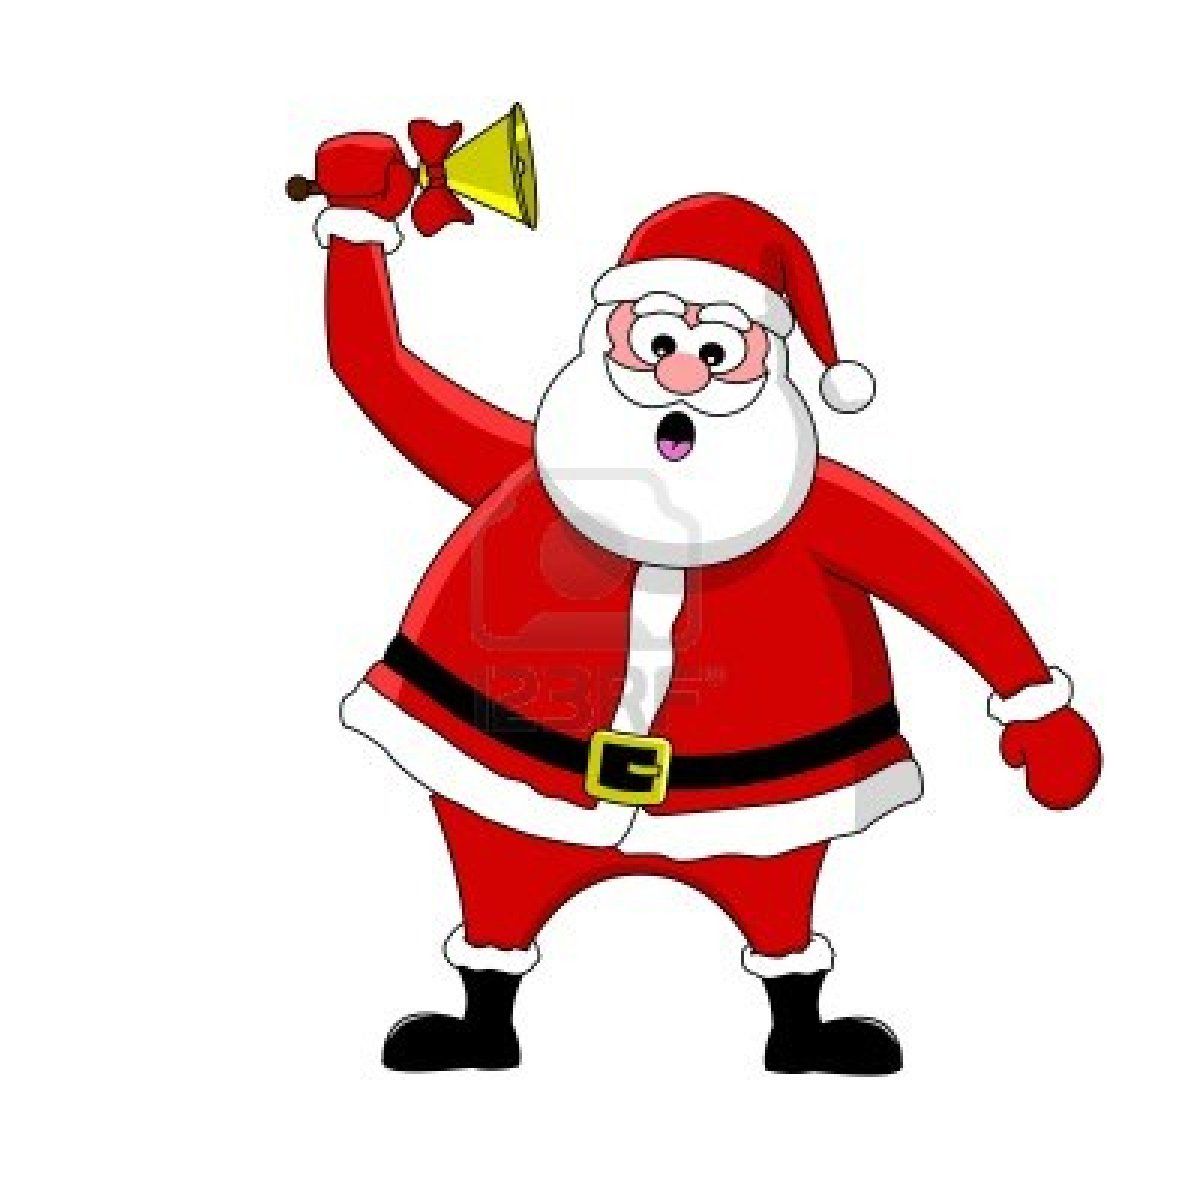 Animated Santa Claus Images